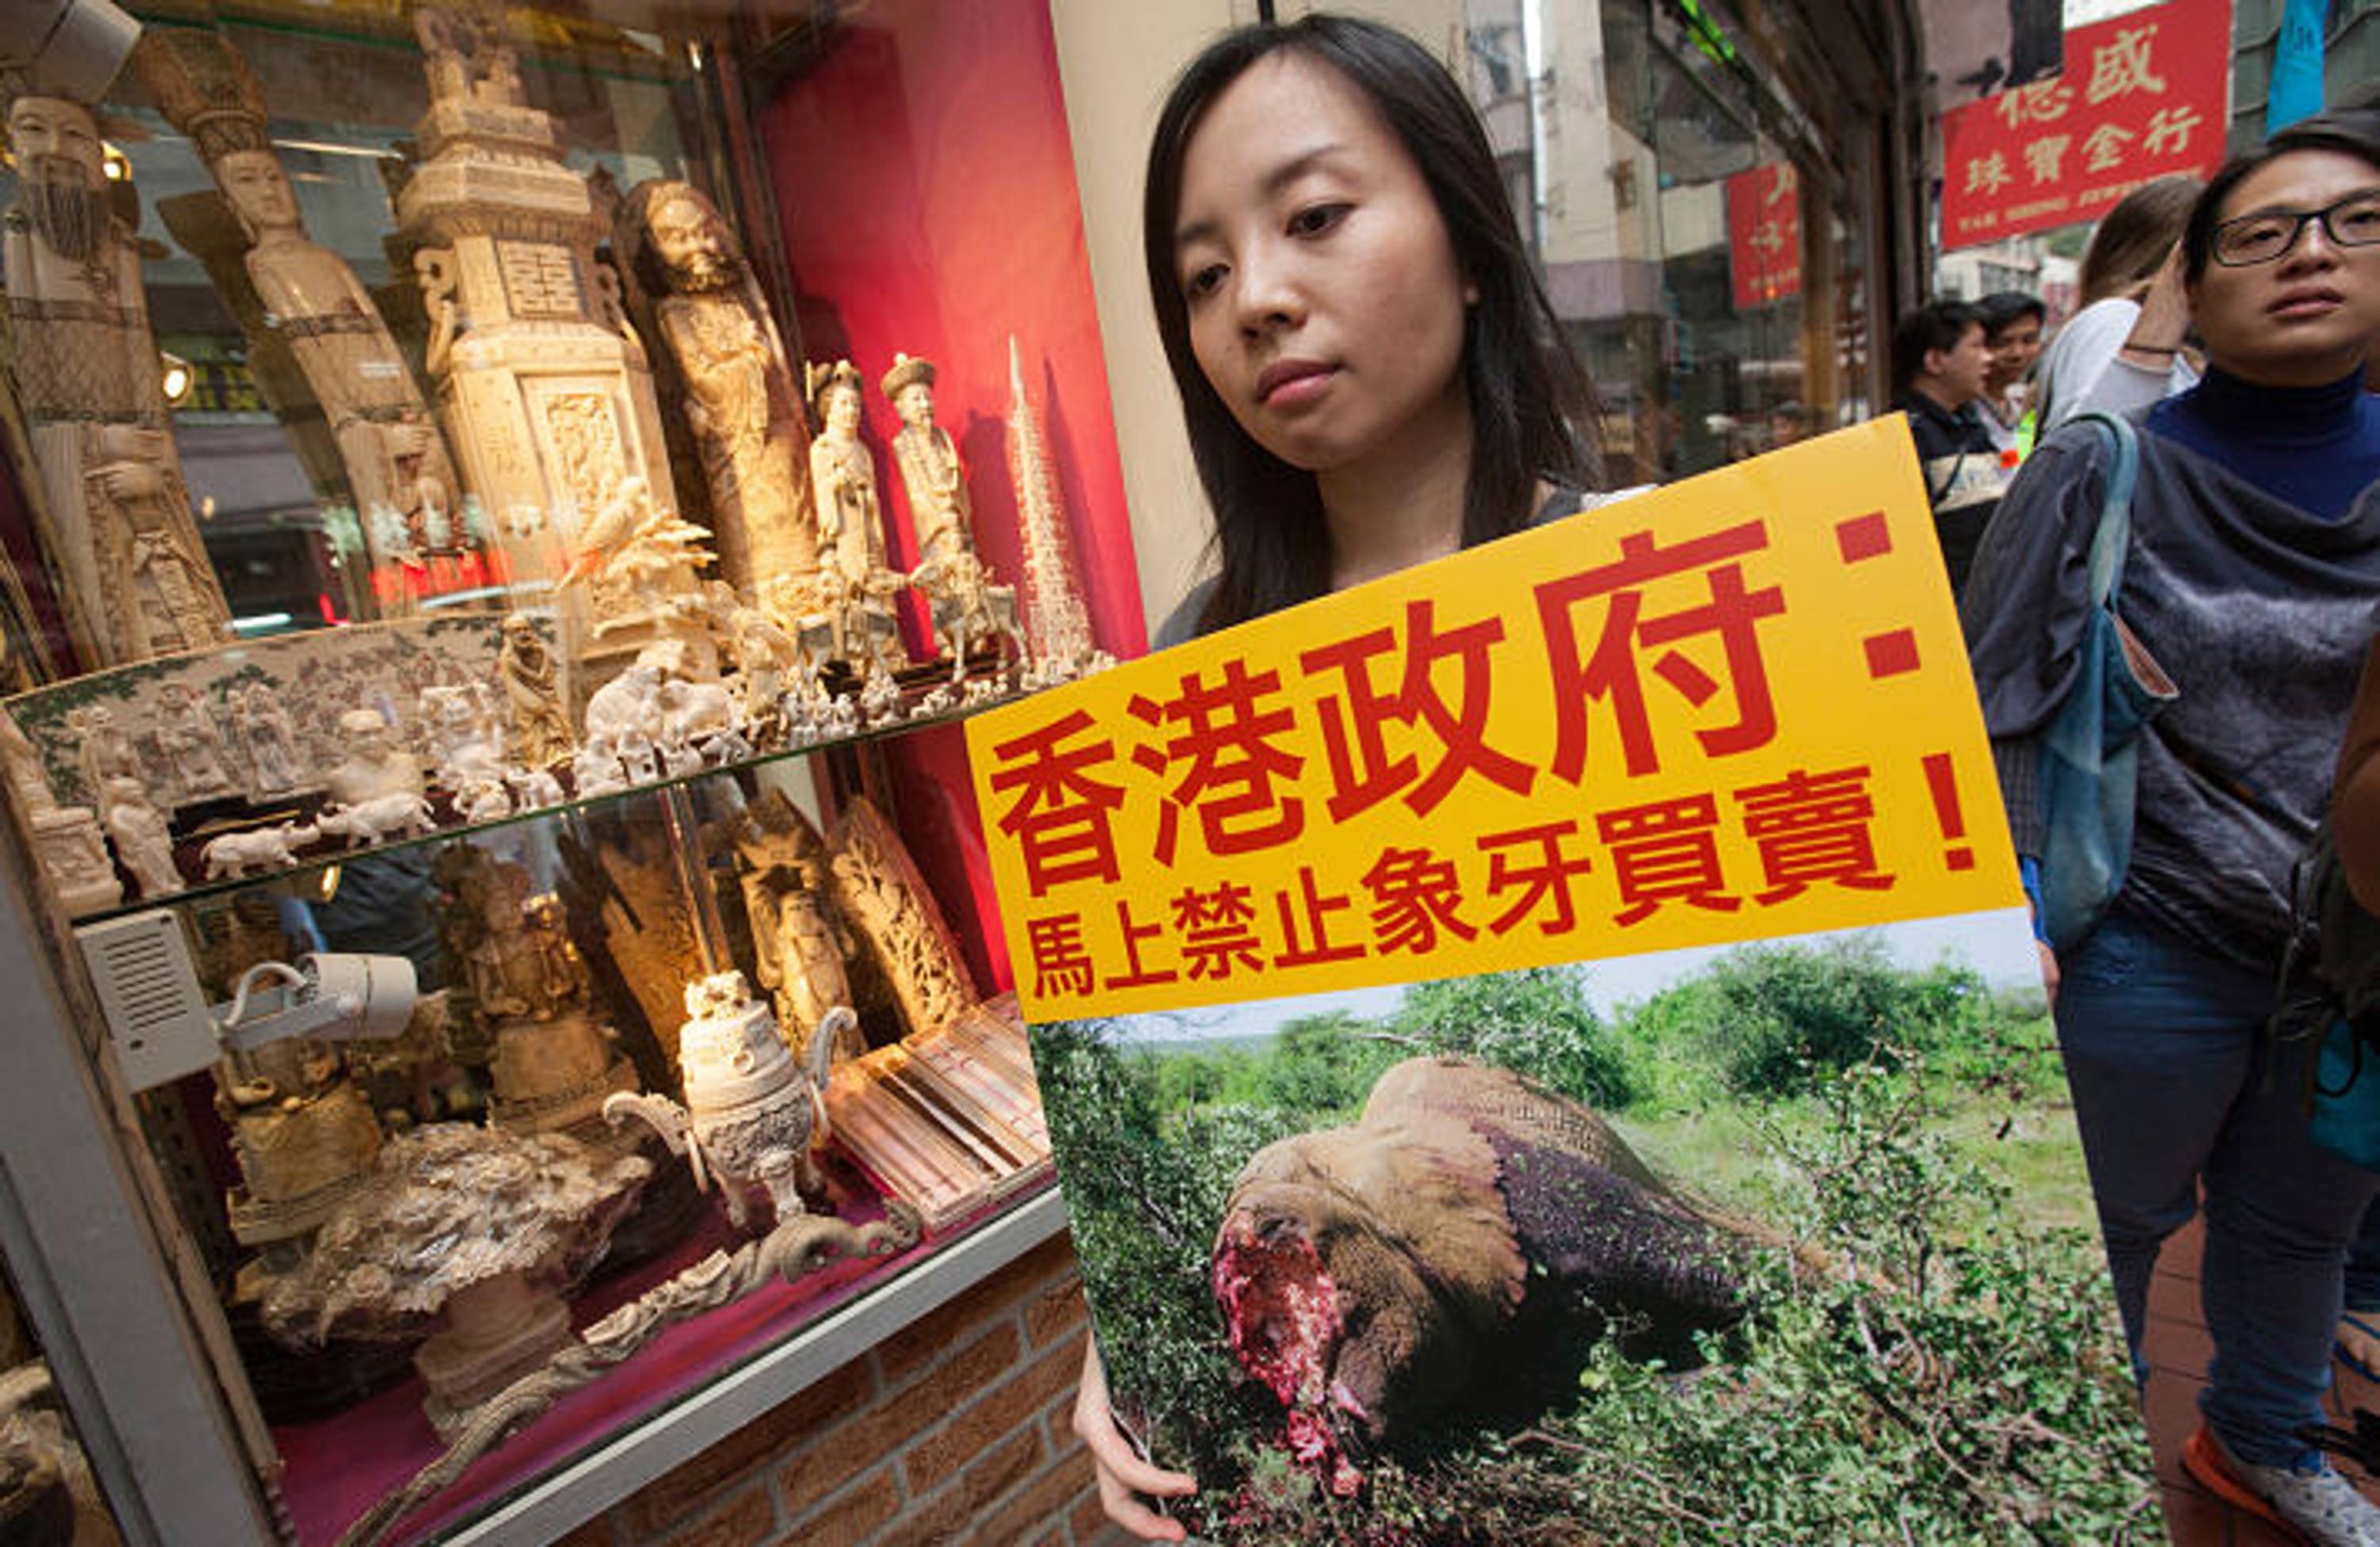 A woman holds a picture of a dead elephant with a Chinese slogan saying &#39;Hong Kong Government: Ban the ivory trade&#39; outside a shop selling ivory during protest against Hong Kong&#39;s legal ivory trade in the city&#39;s main ivory selling district of Hollywood Road and Queen&#39;s Road Central, Sheung Wan, Hong Kong, China, 14 March 2015.  According to Kenya-based NGO &#39;Save the Elephants&#39;, 100,000 elephants were illegally-killed for their tusks from 2010 to 2012, a poaching crisis driven in large part by consumers in Hong Kong and China.